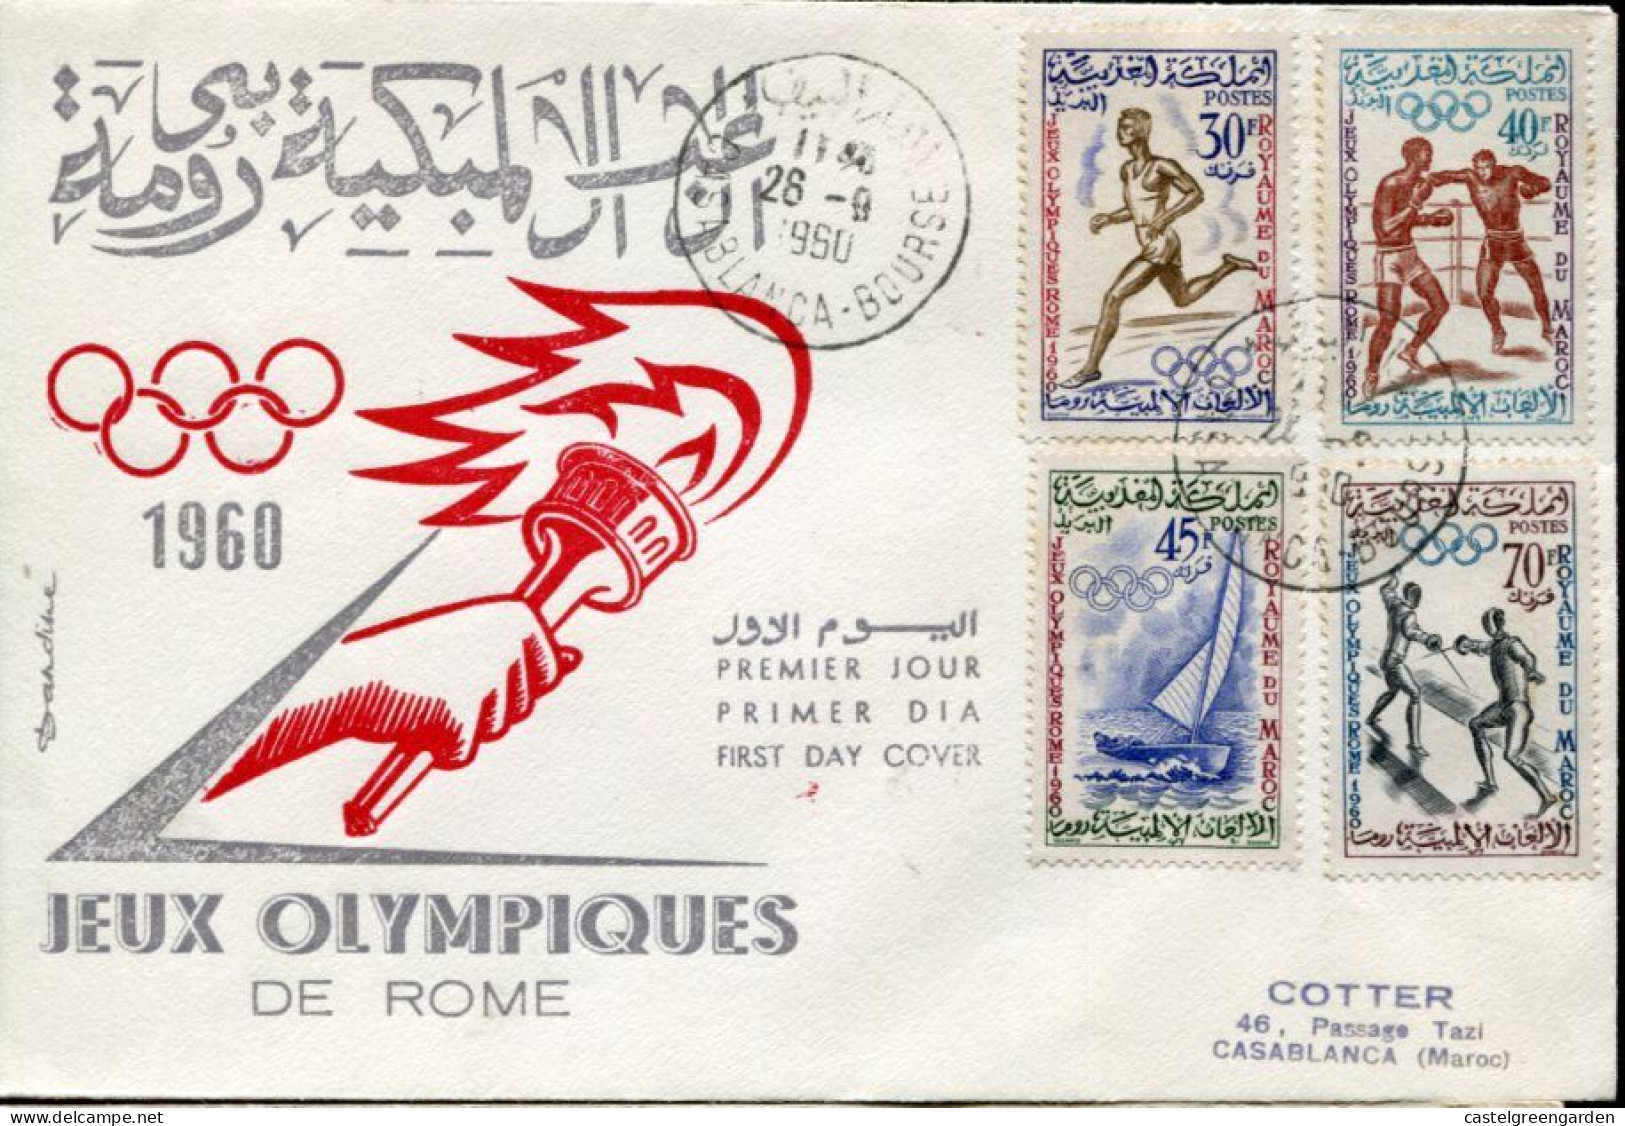 X0312 Morocco, Fdc 1960 4 Stamps For The Olympiade Of Rome, Jeux Olympiques De Rome - Estate 1960: Roma